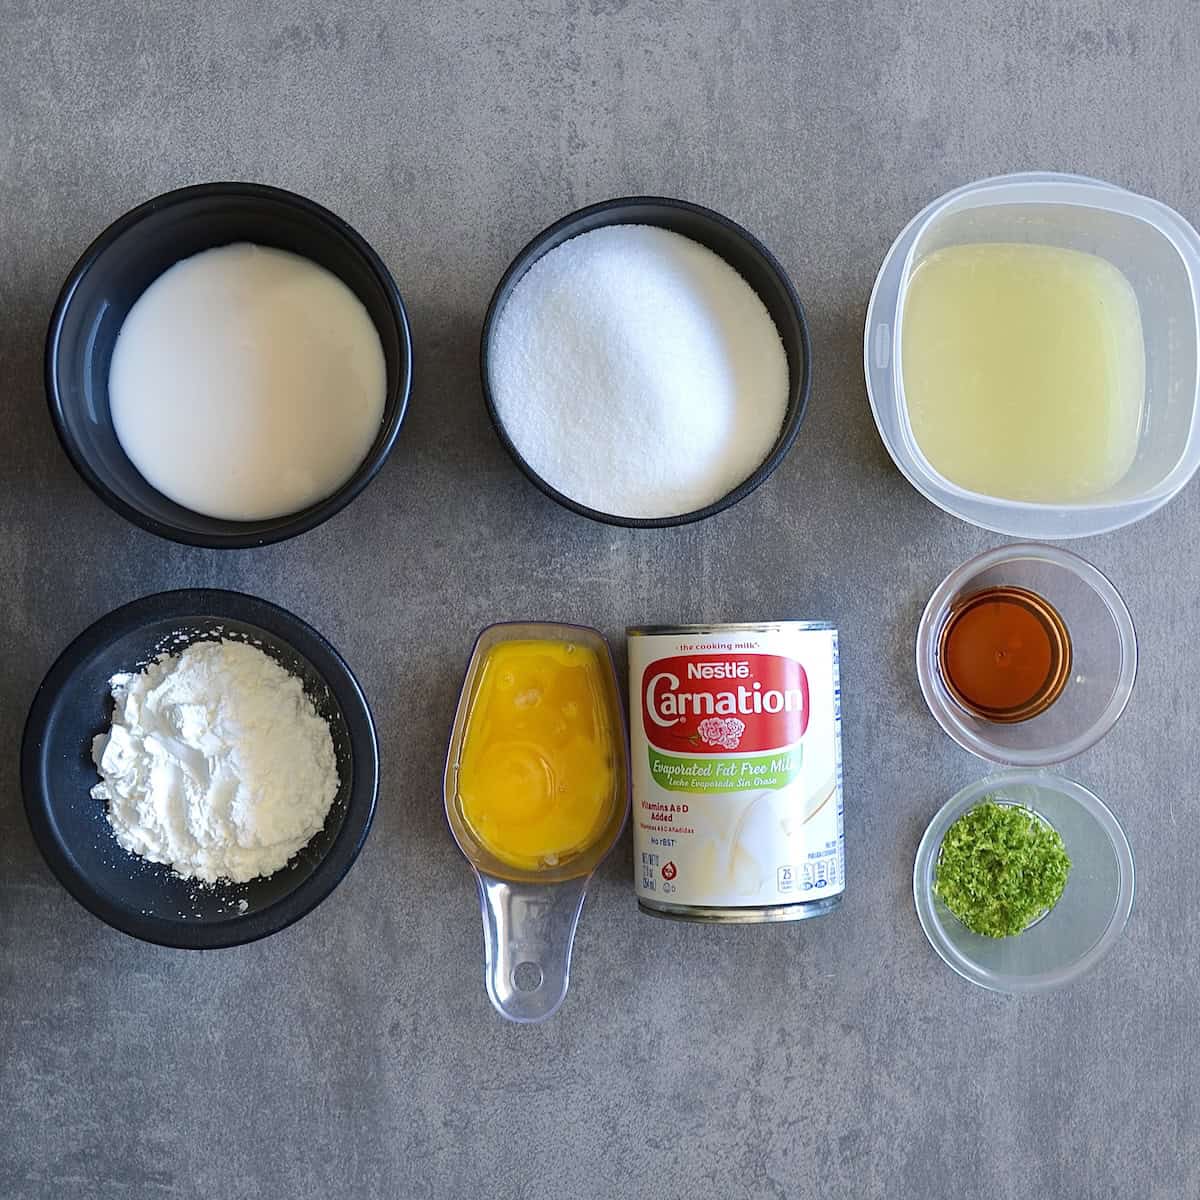 Ingredients for key lime pie filling